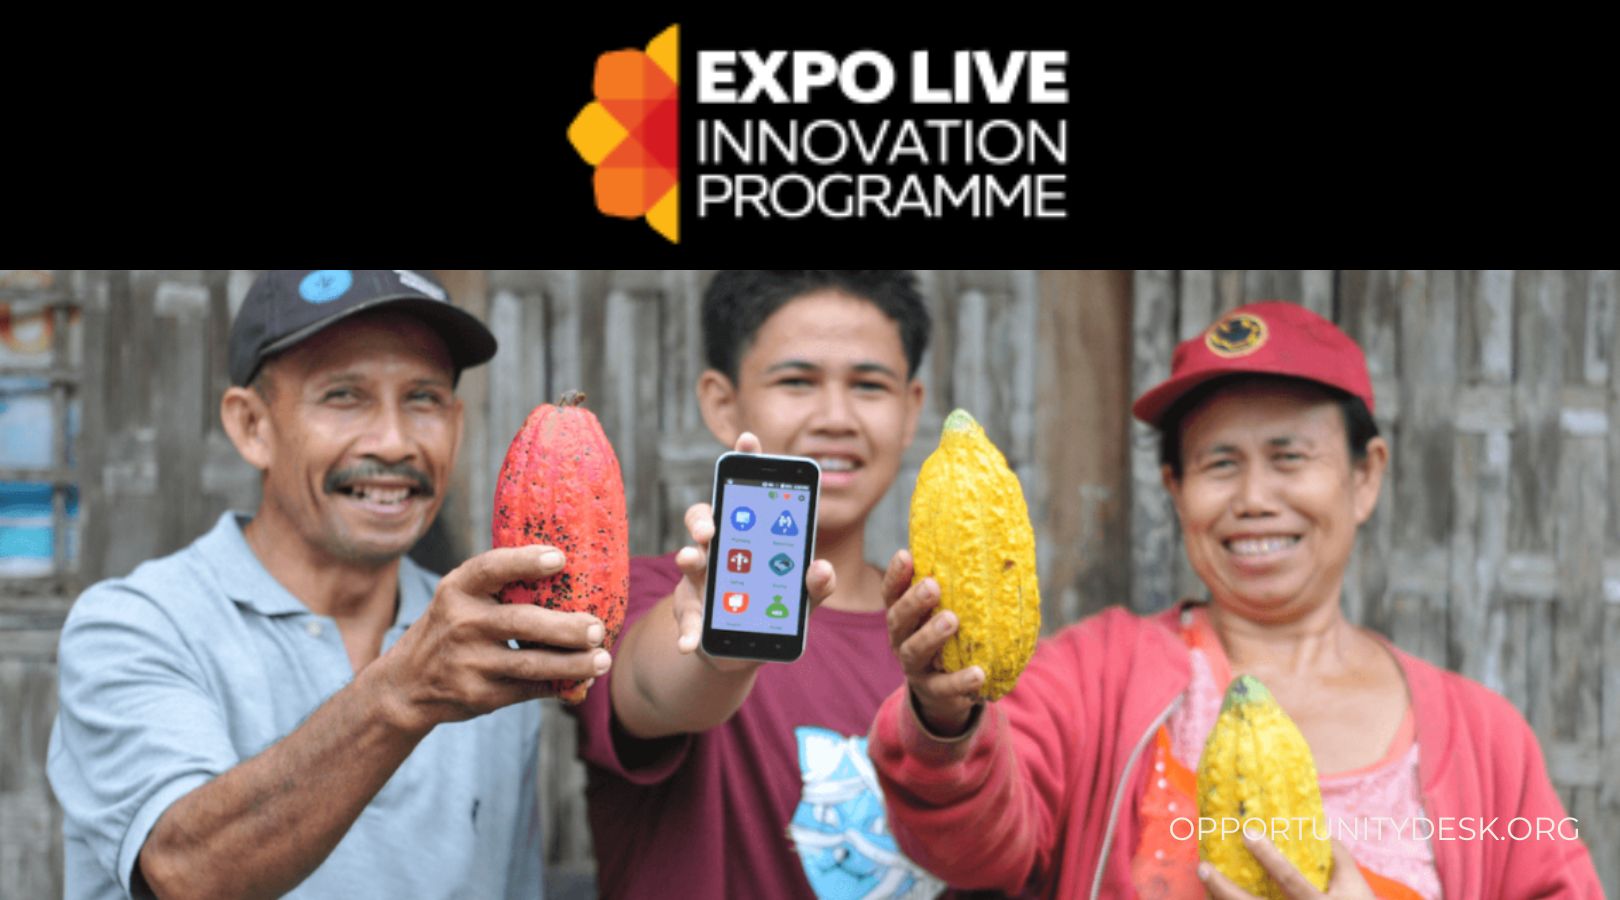 Expo Live Innovation Impact Grant Programme 2023 for Global Startups (Up to $50,000 in funding)